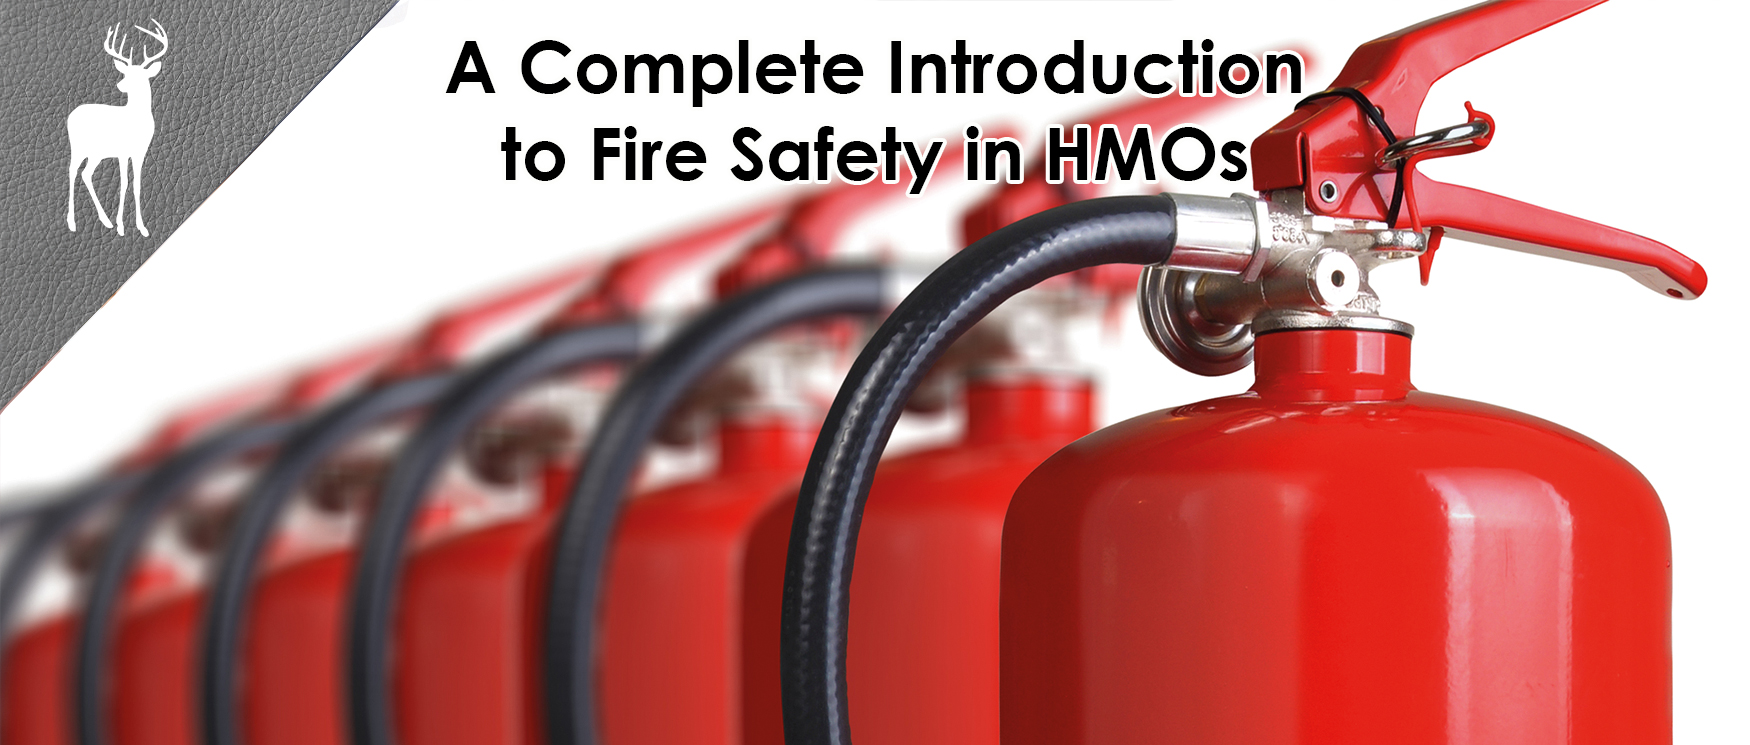 fire safe hmo, fire regulations lettings, fore regulations hmo